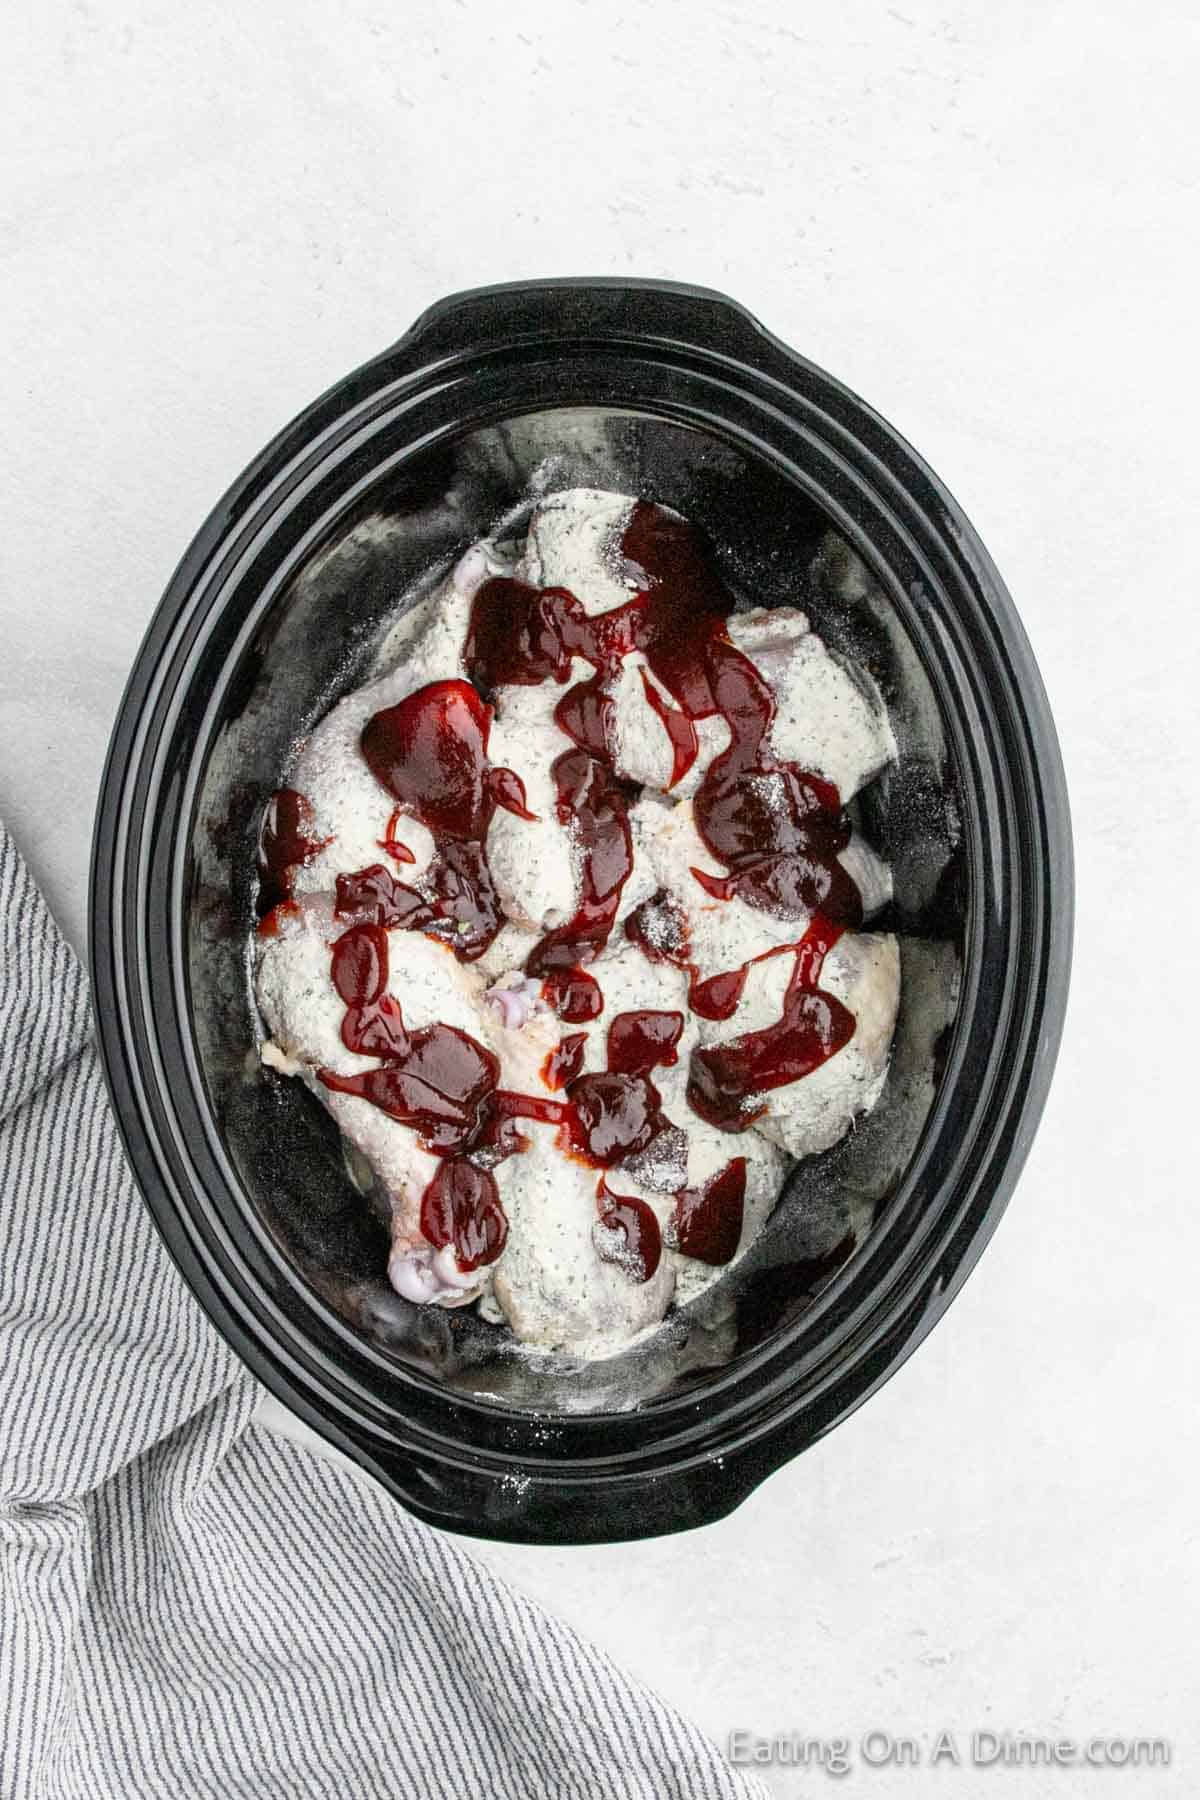 A black crock pot filled with chicken breasts covered in a creamy white sauce and drizzled with a reddish-purple sauce. The cooker is set on a light-colored countertop next to a folded, white and gray striped cloth, reminiscent of a delicious BBQ ranch recipe but tailored for tender chicken.